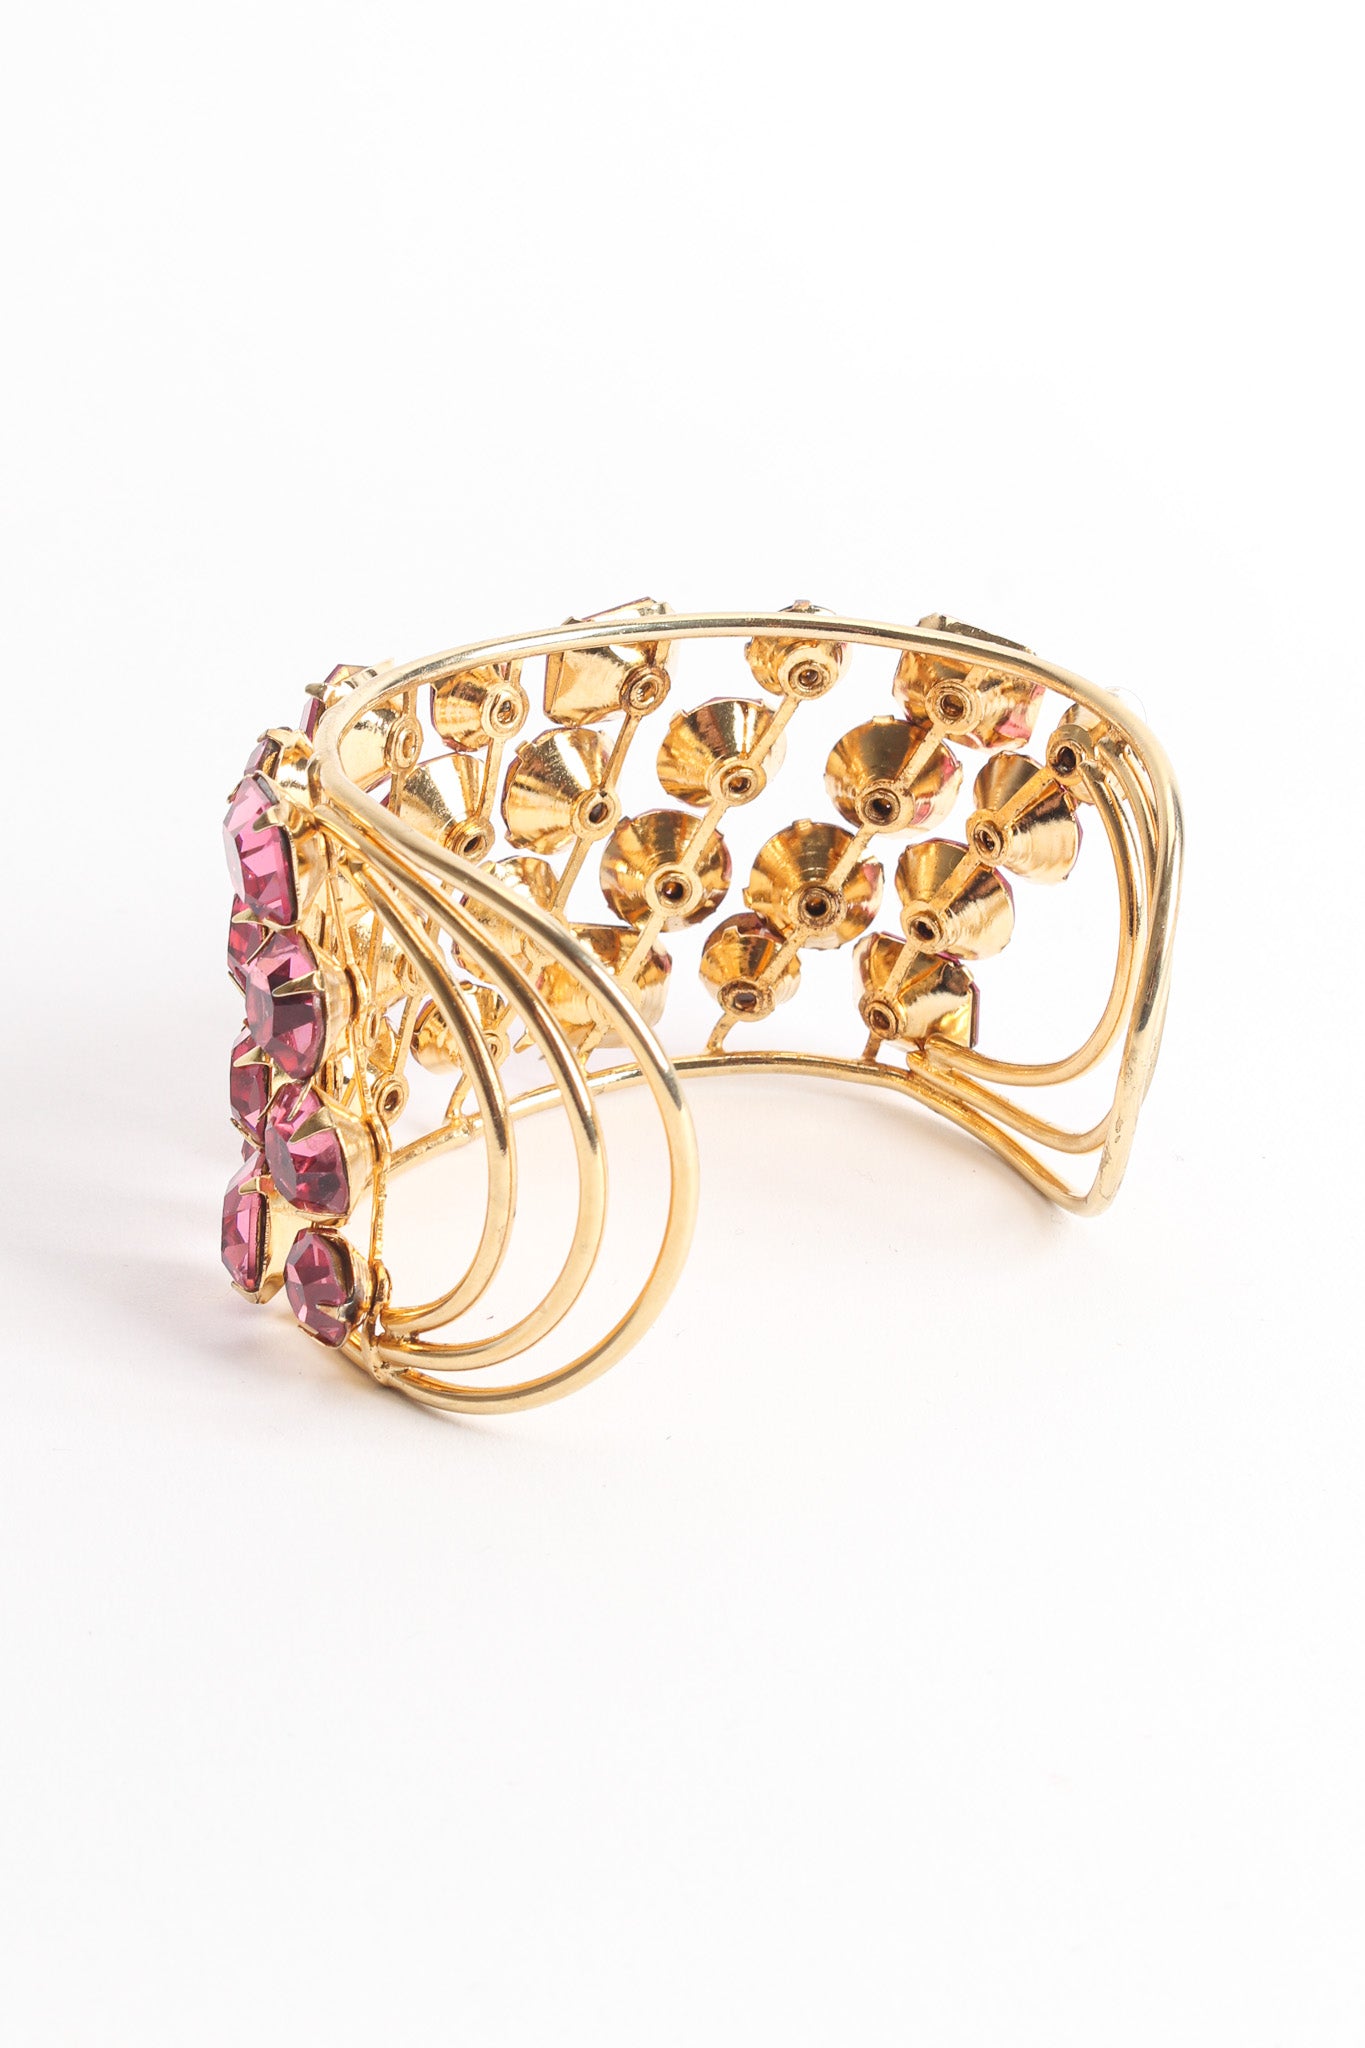 Vintage Rose Pink Crystal Wire Cuff back cuff @ Recess Los Angeles